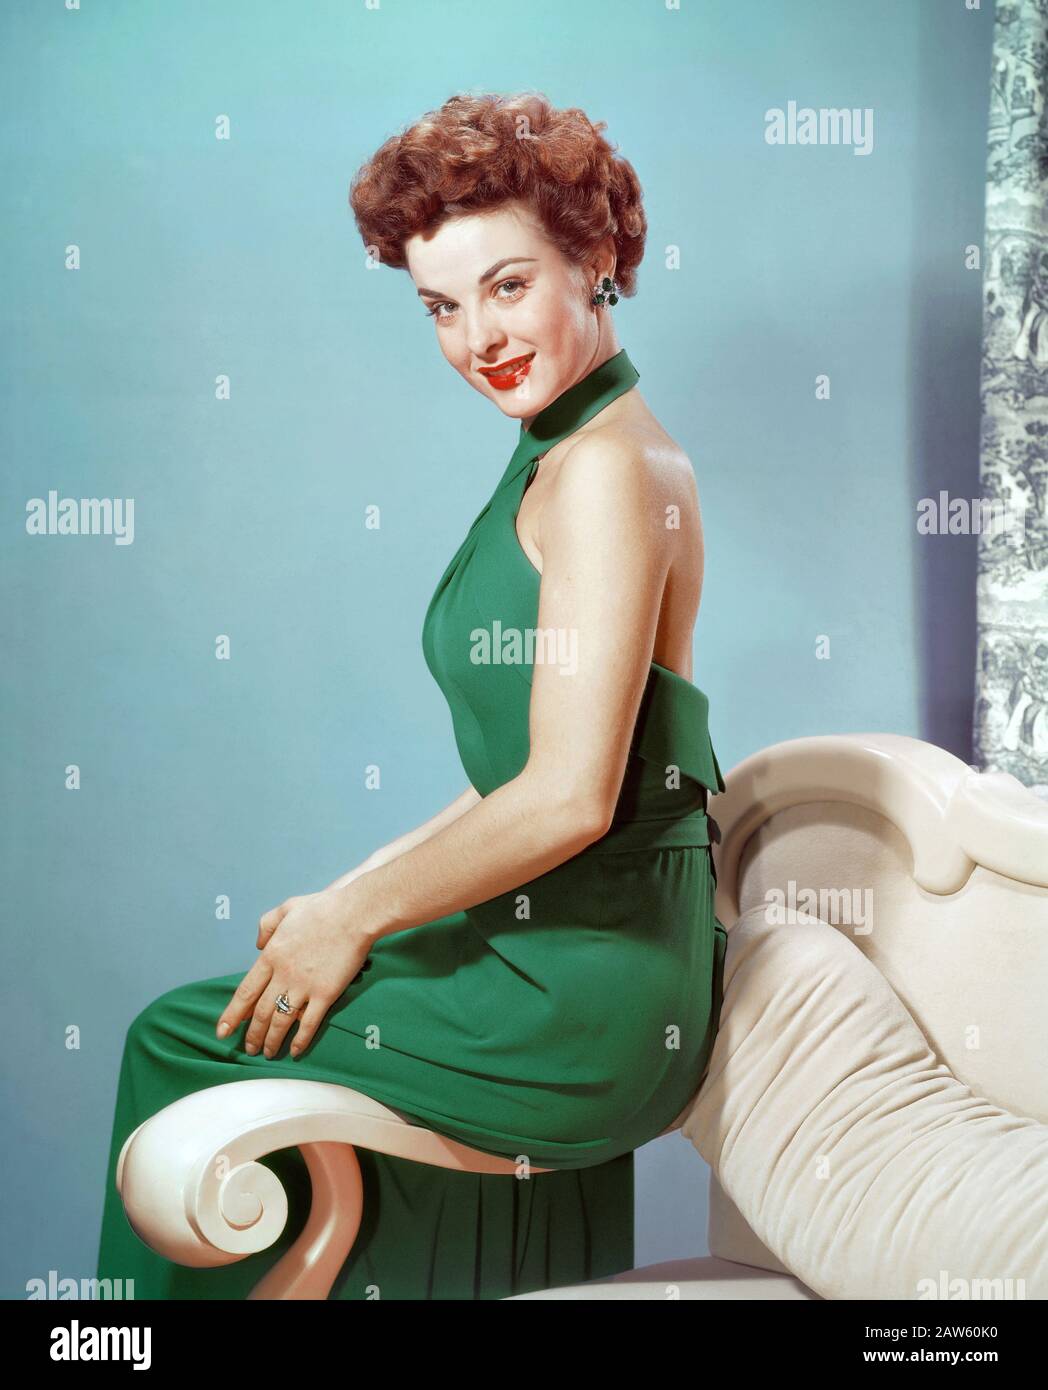 1951 , USA :  The movie actress JEAN PETERS  ( 1926 - 2000 ), pubblicity still for movie ' Take Care of My Little Girl '  by  Jean Negulesco   .  - FI Stock Photo